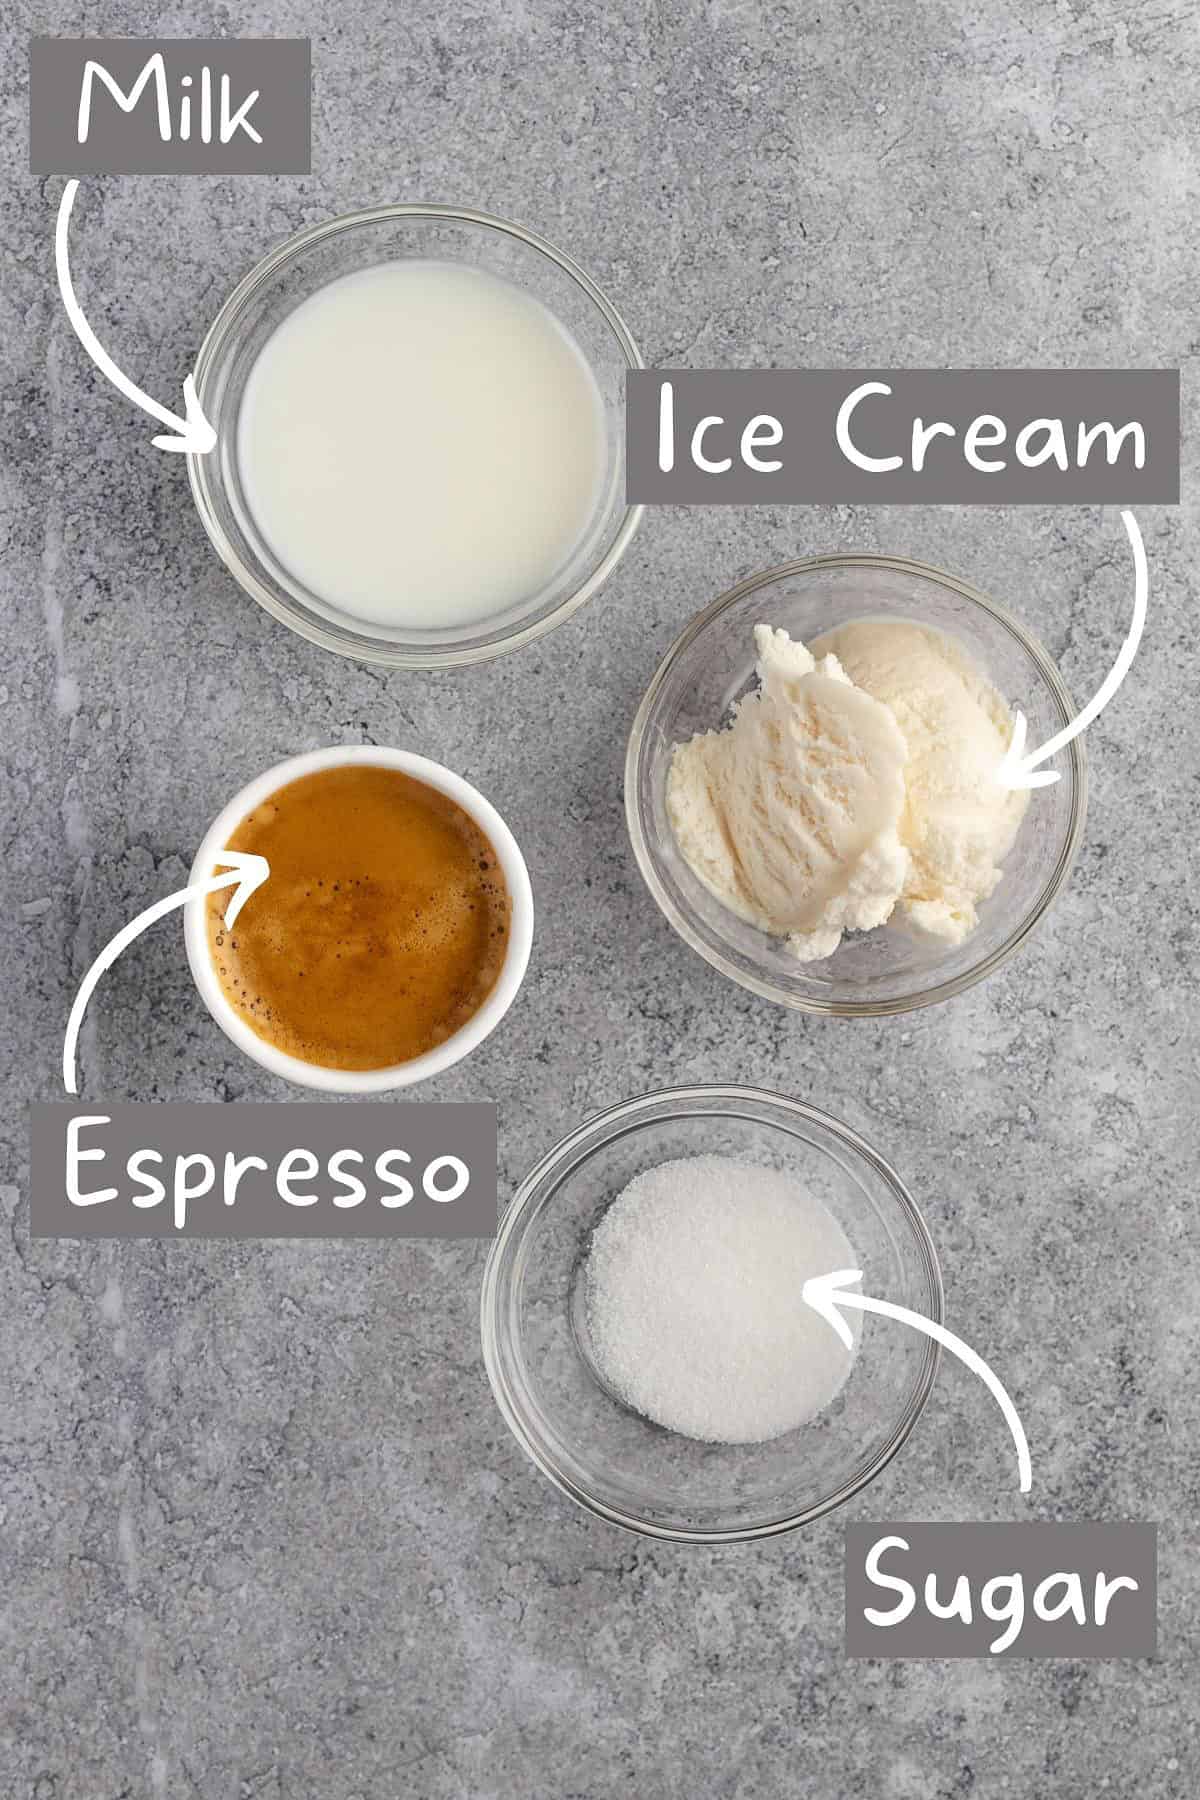 Ingredients needed to make the coffee ice cream.